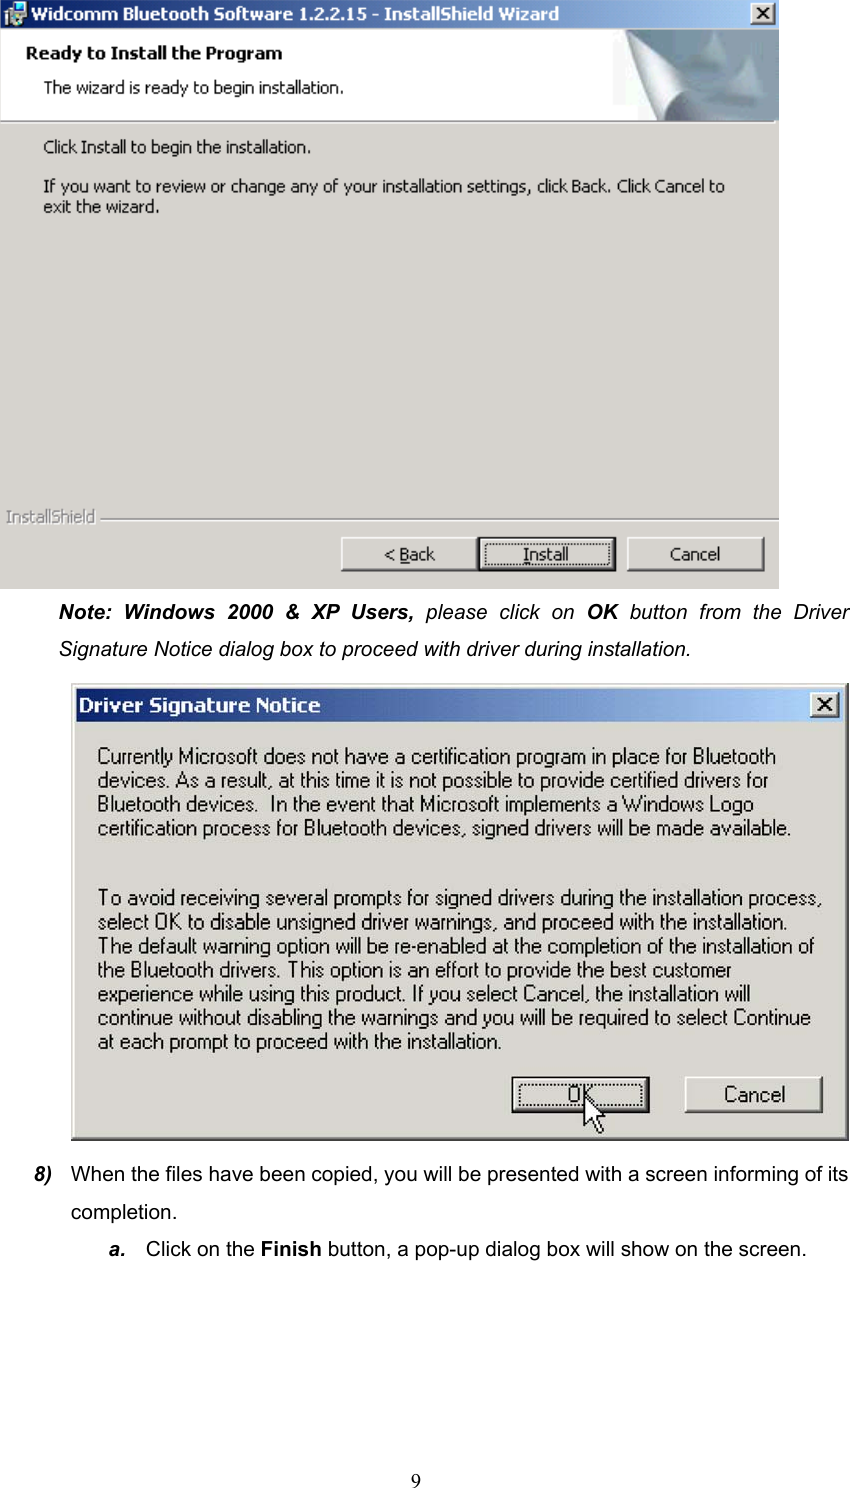  9  Note: Windows 2000 &amp; XP Users, please click on OK button from the Driver Signature Notice dialog box to proceed with driver during installation.  8)  When the files have been copied, you will be presented with a screen informing of its completion.   a.  Click on the Finish button, a pop-up dialog box will show on the screen. 